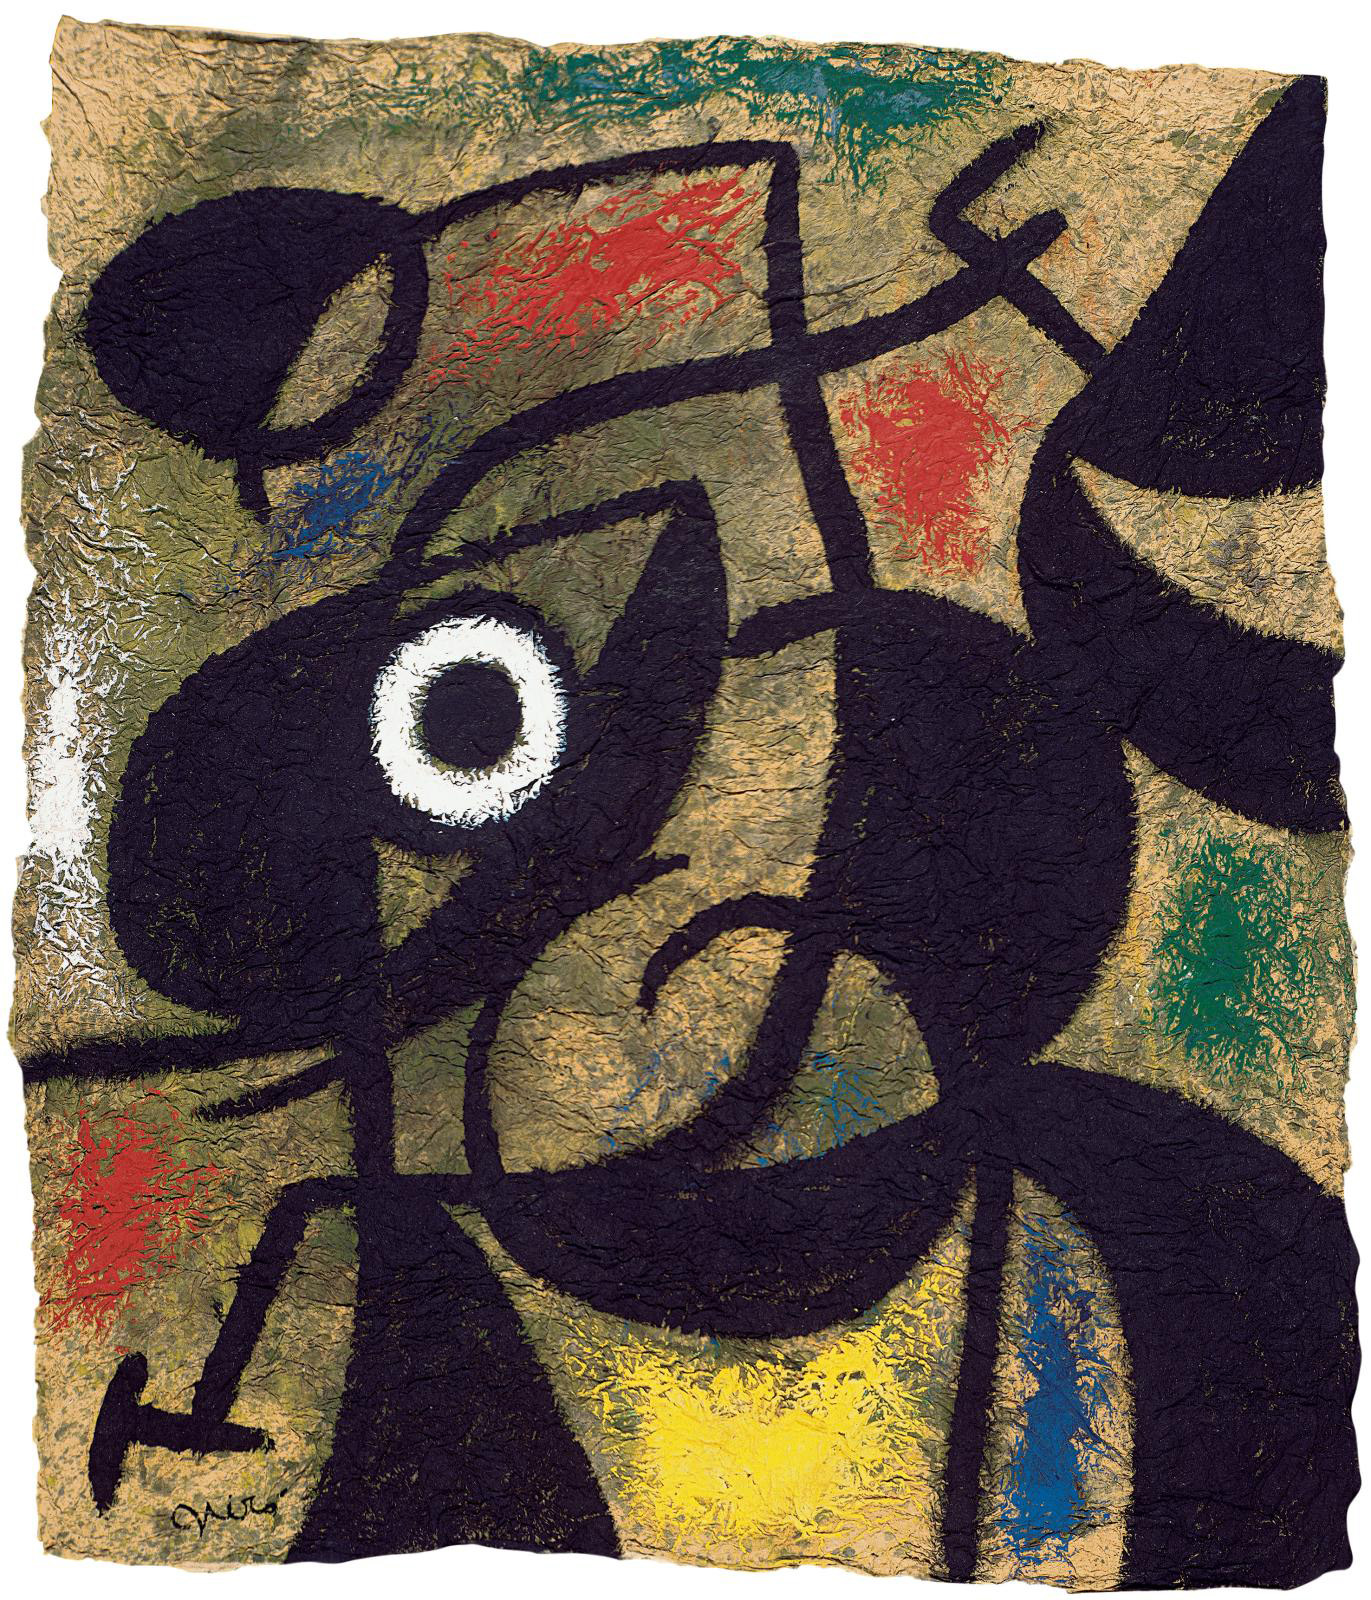 Joan Miró (1893-1983), Femme oiseau (Bird Woman), August 19, 1972, gouache on crinkled paper, 79 x 70 cm/31.10 x 27.55 in. Gift from the M